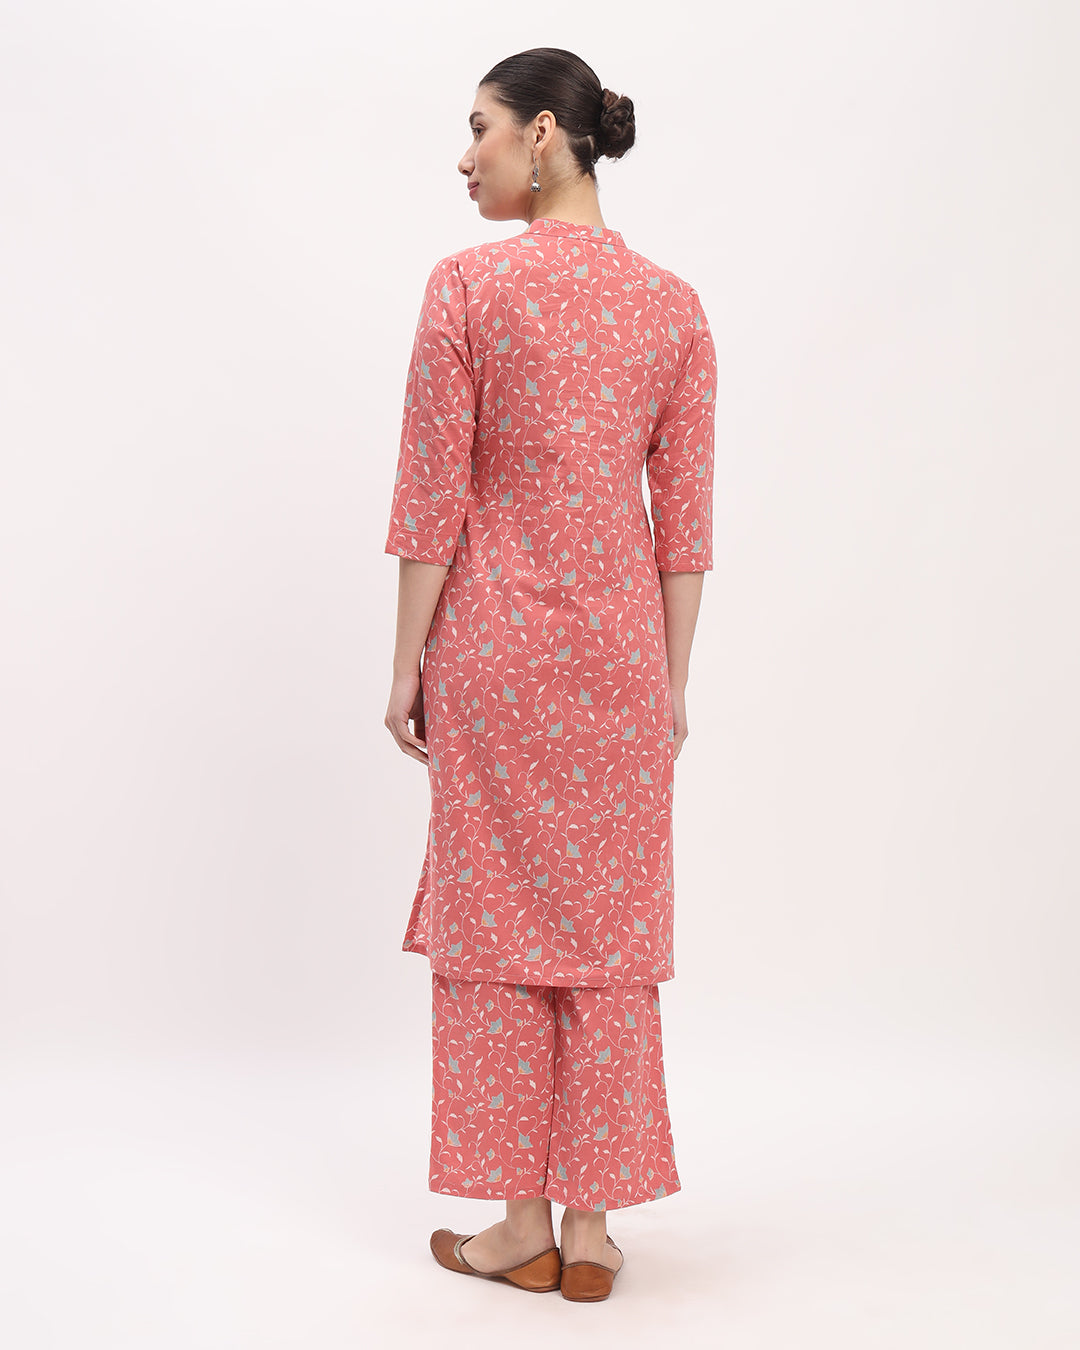 Combo: English Floral Garden & Blue Starry High-Low Printed Kurta (Without Bottoms)